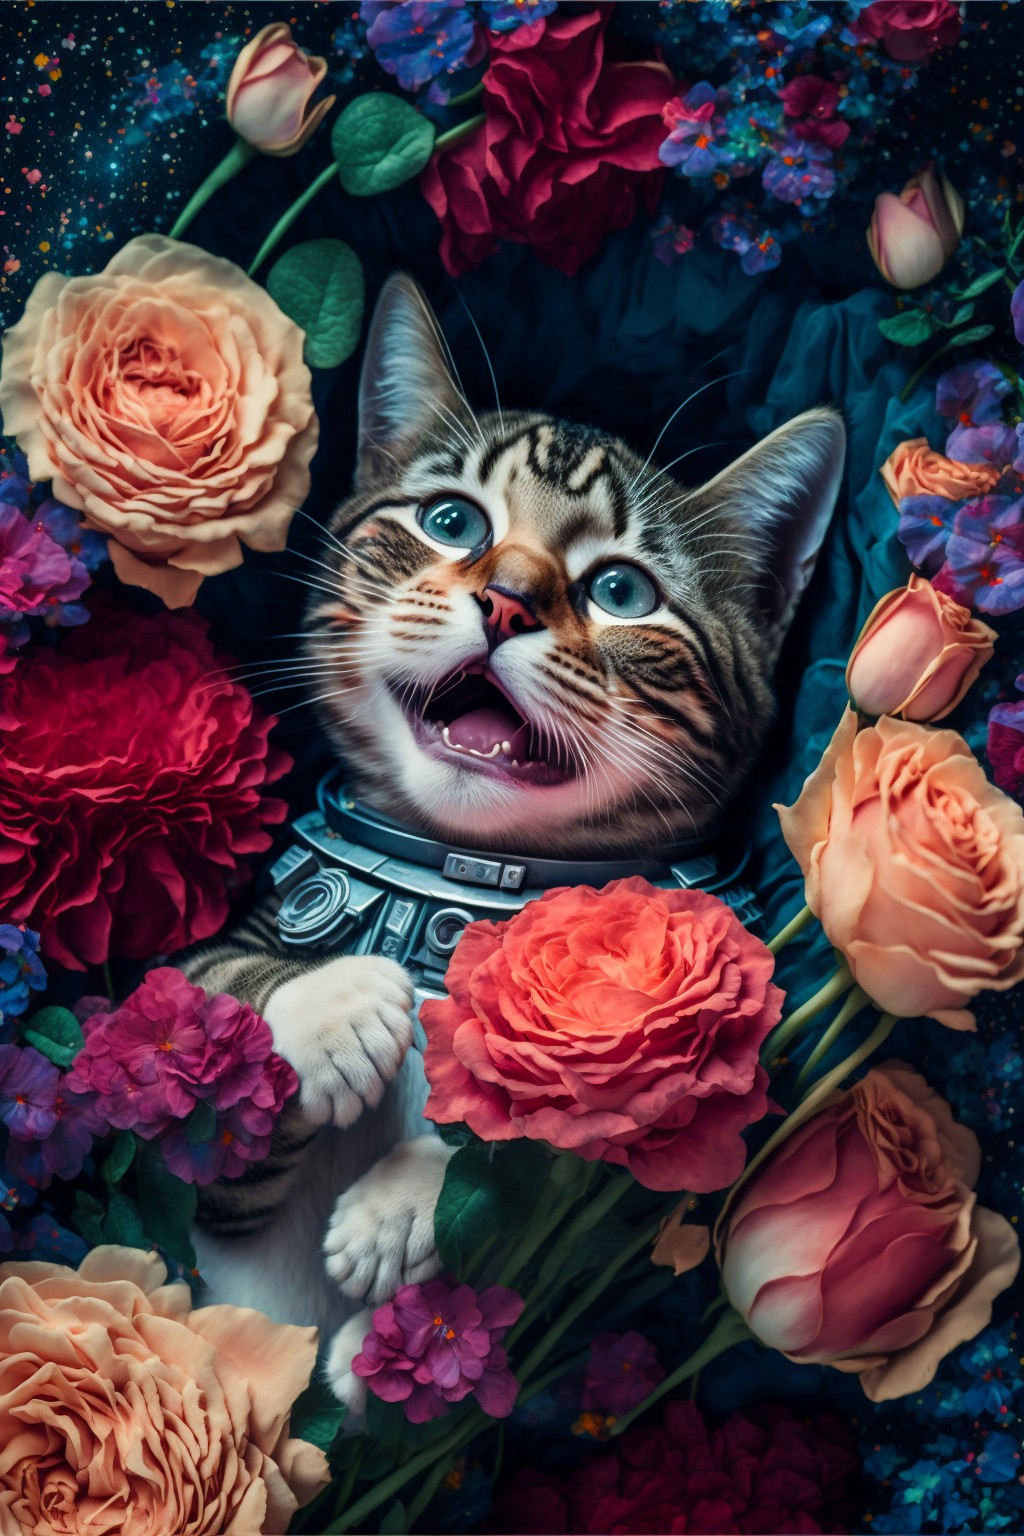 The cat astronaut who came to the rose planet